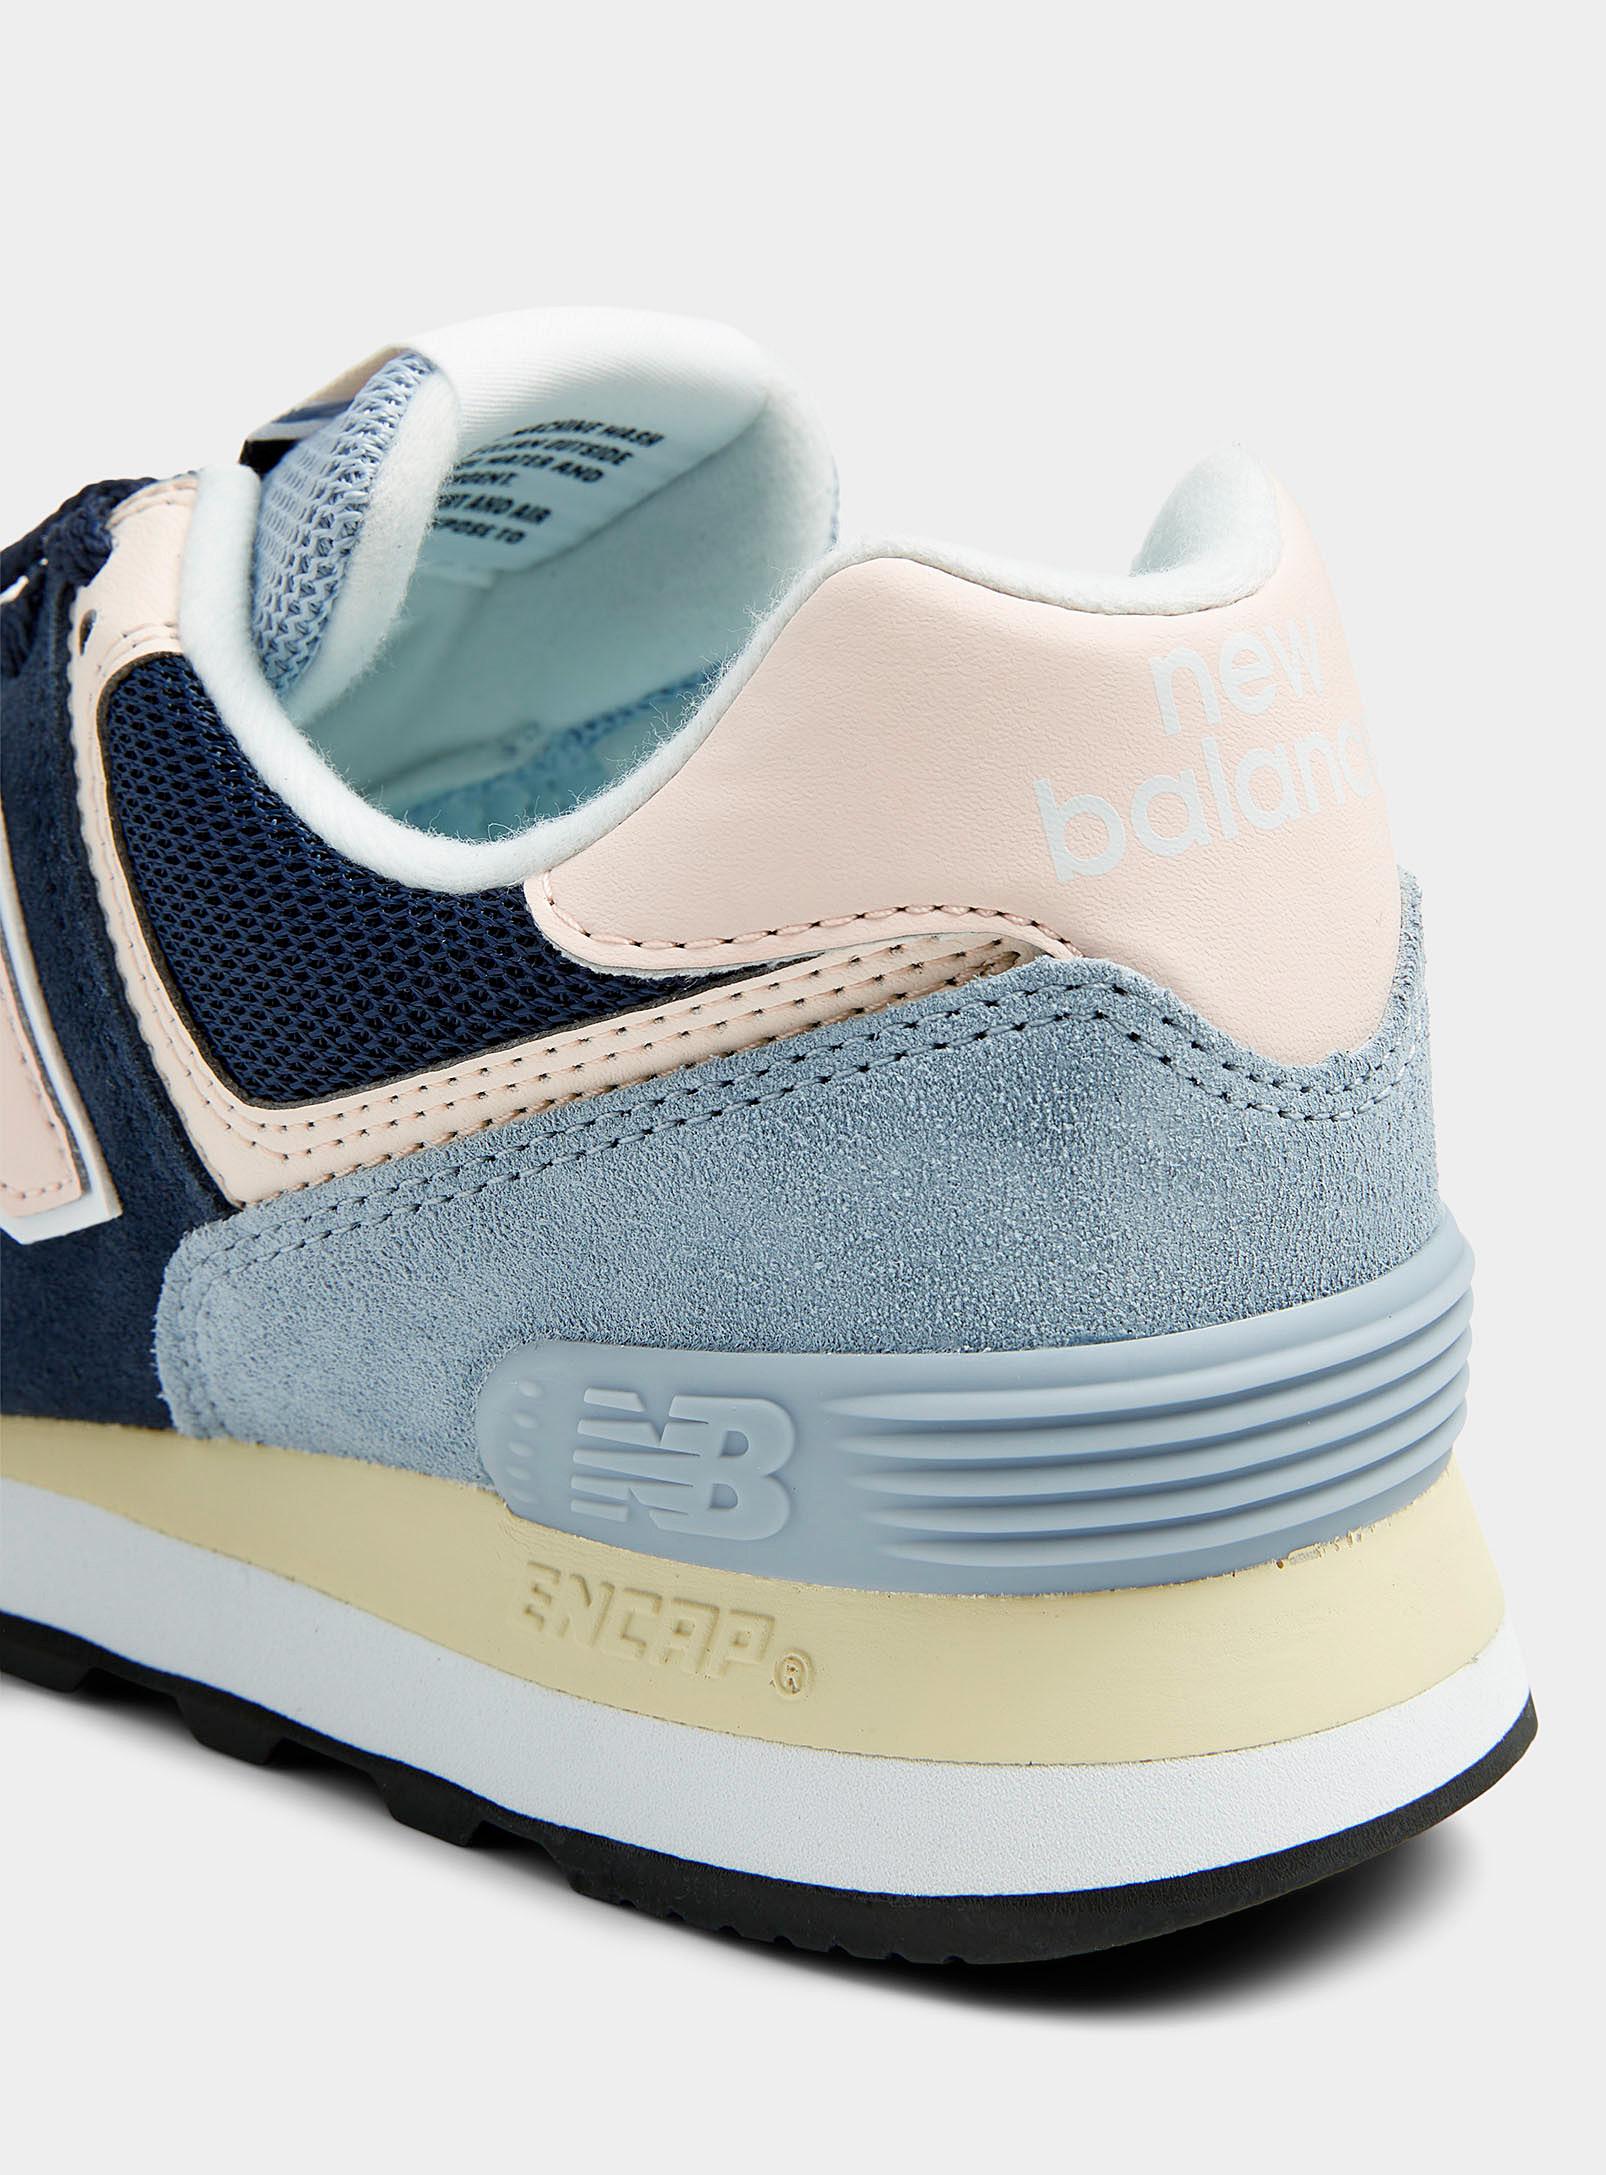 New Balance Blue And Peach 574 Sneakers Women | Lyst